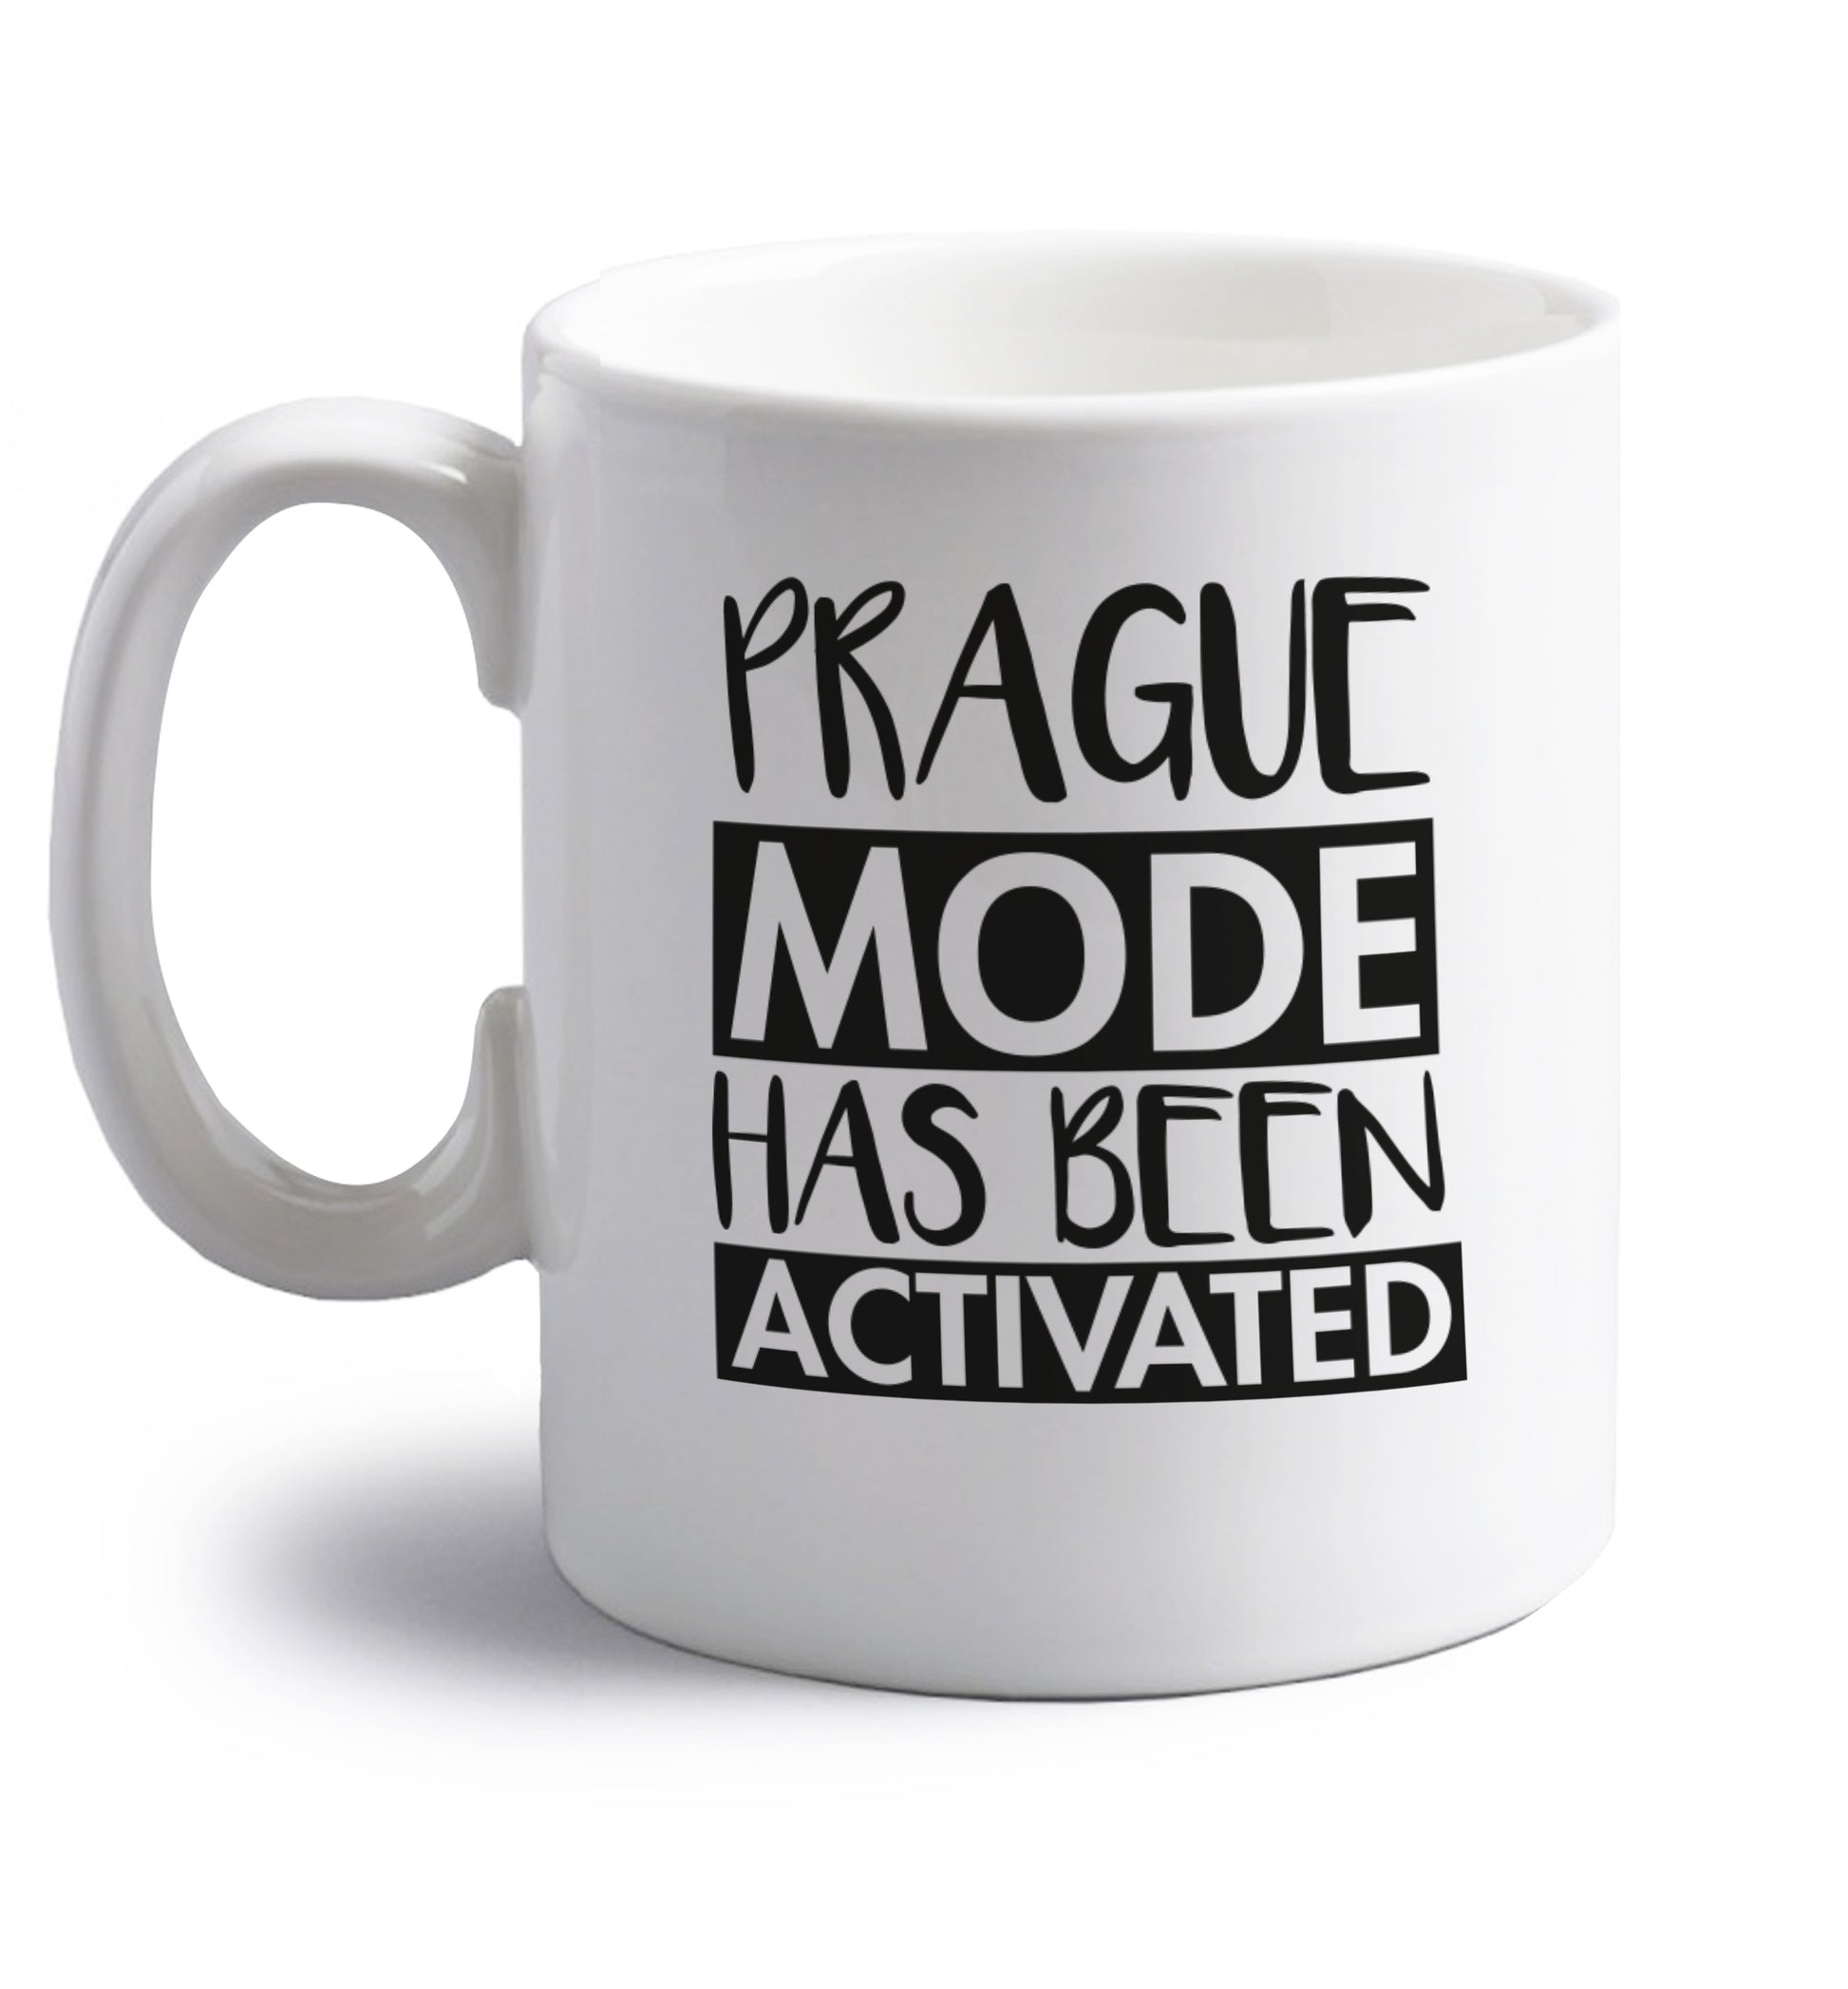 Prague mode has been activated right handed white ceramic mug 